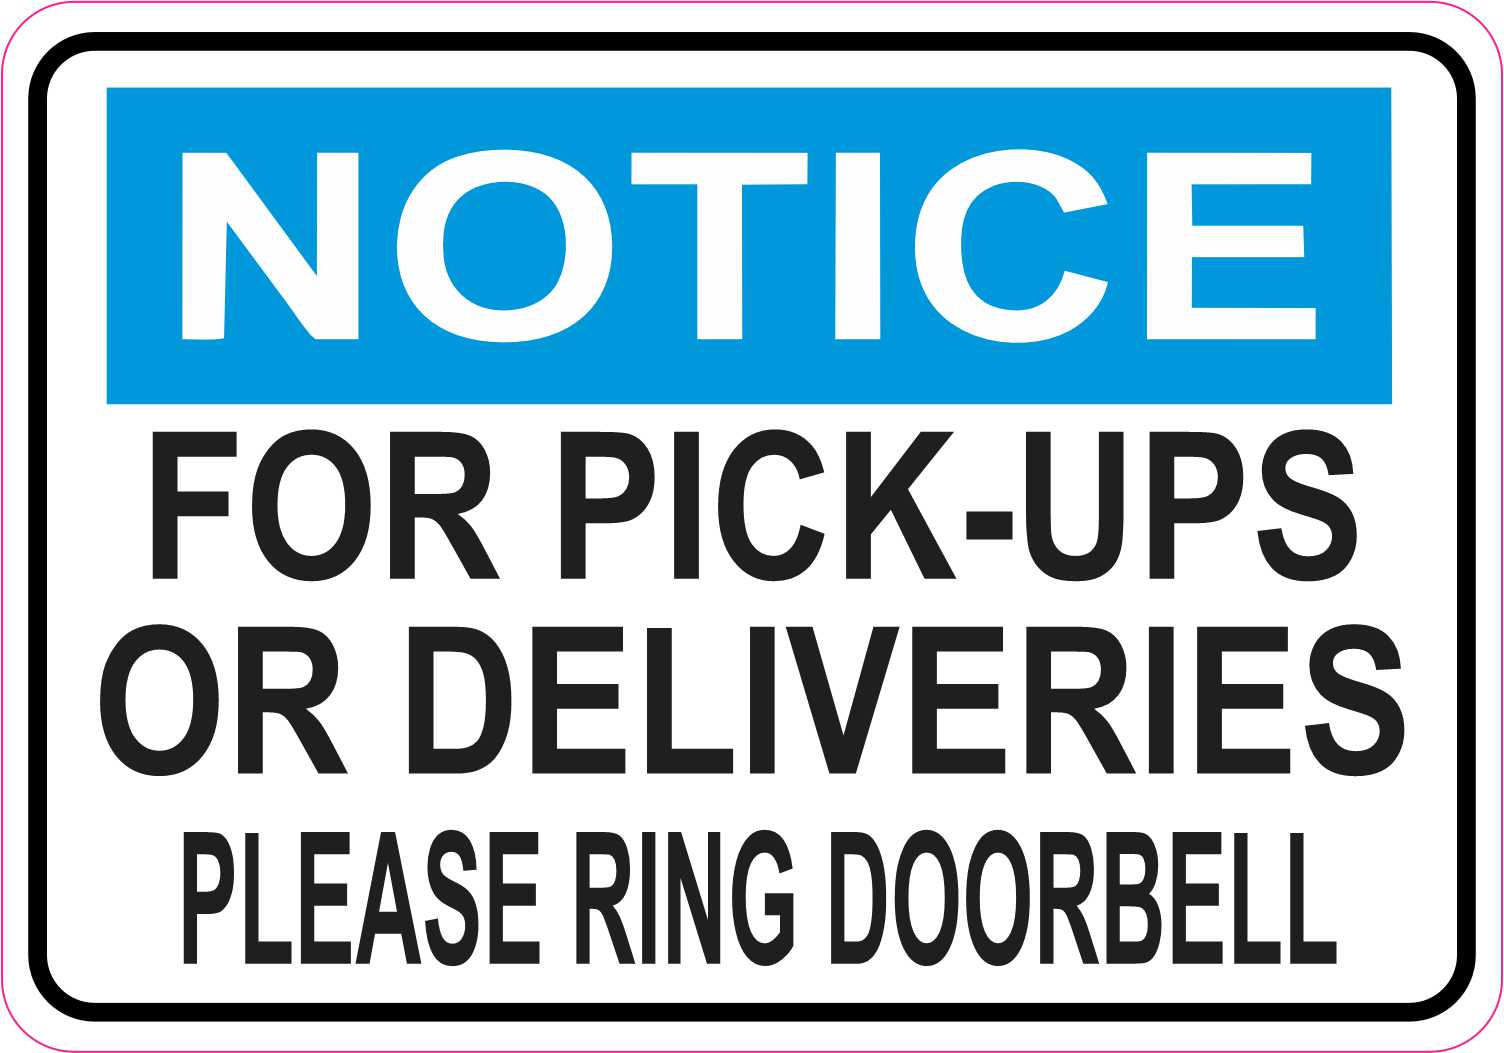 Stickertalk Ring Doorbell For Pick Ups Or Deliveries Vinyl Sticker 5 Inches X 35 Inches 